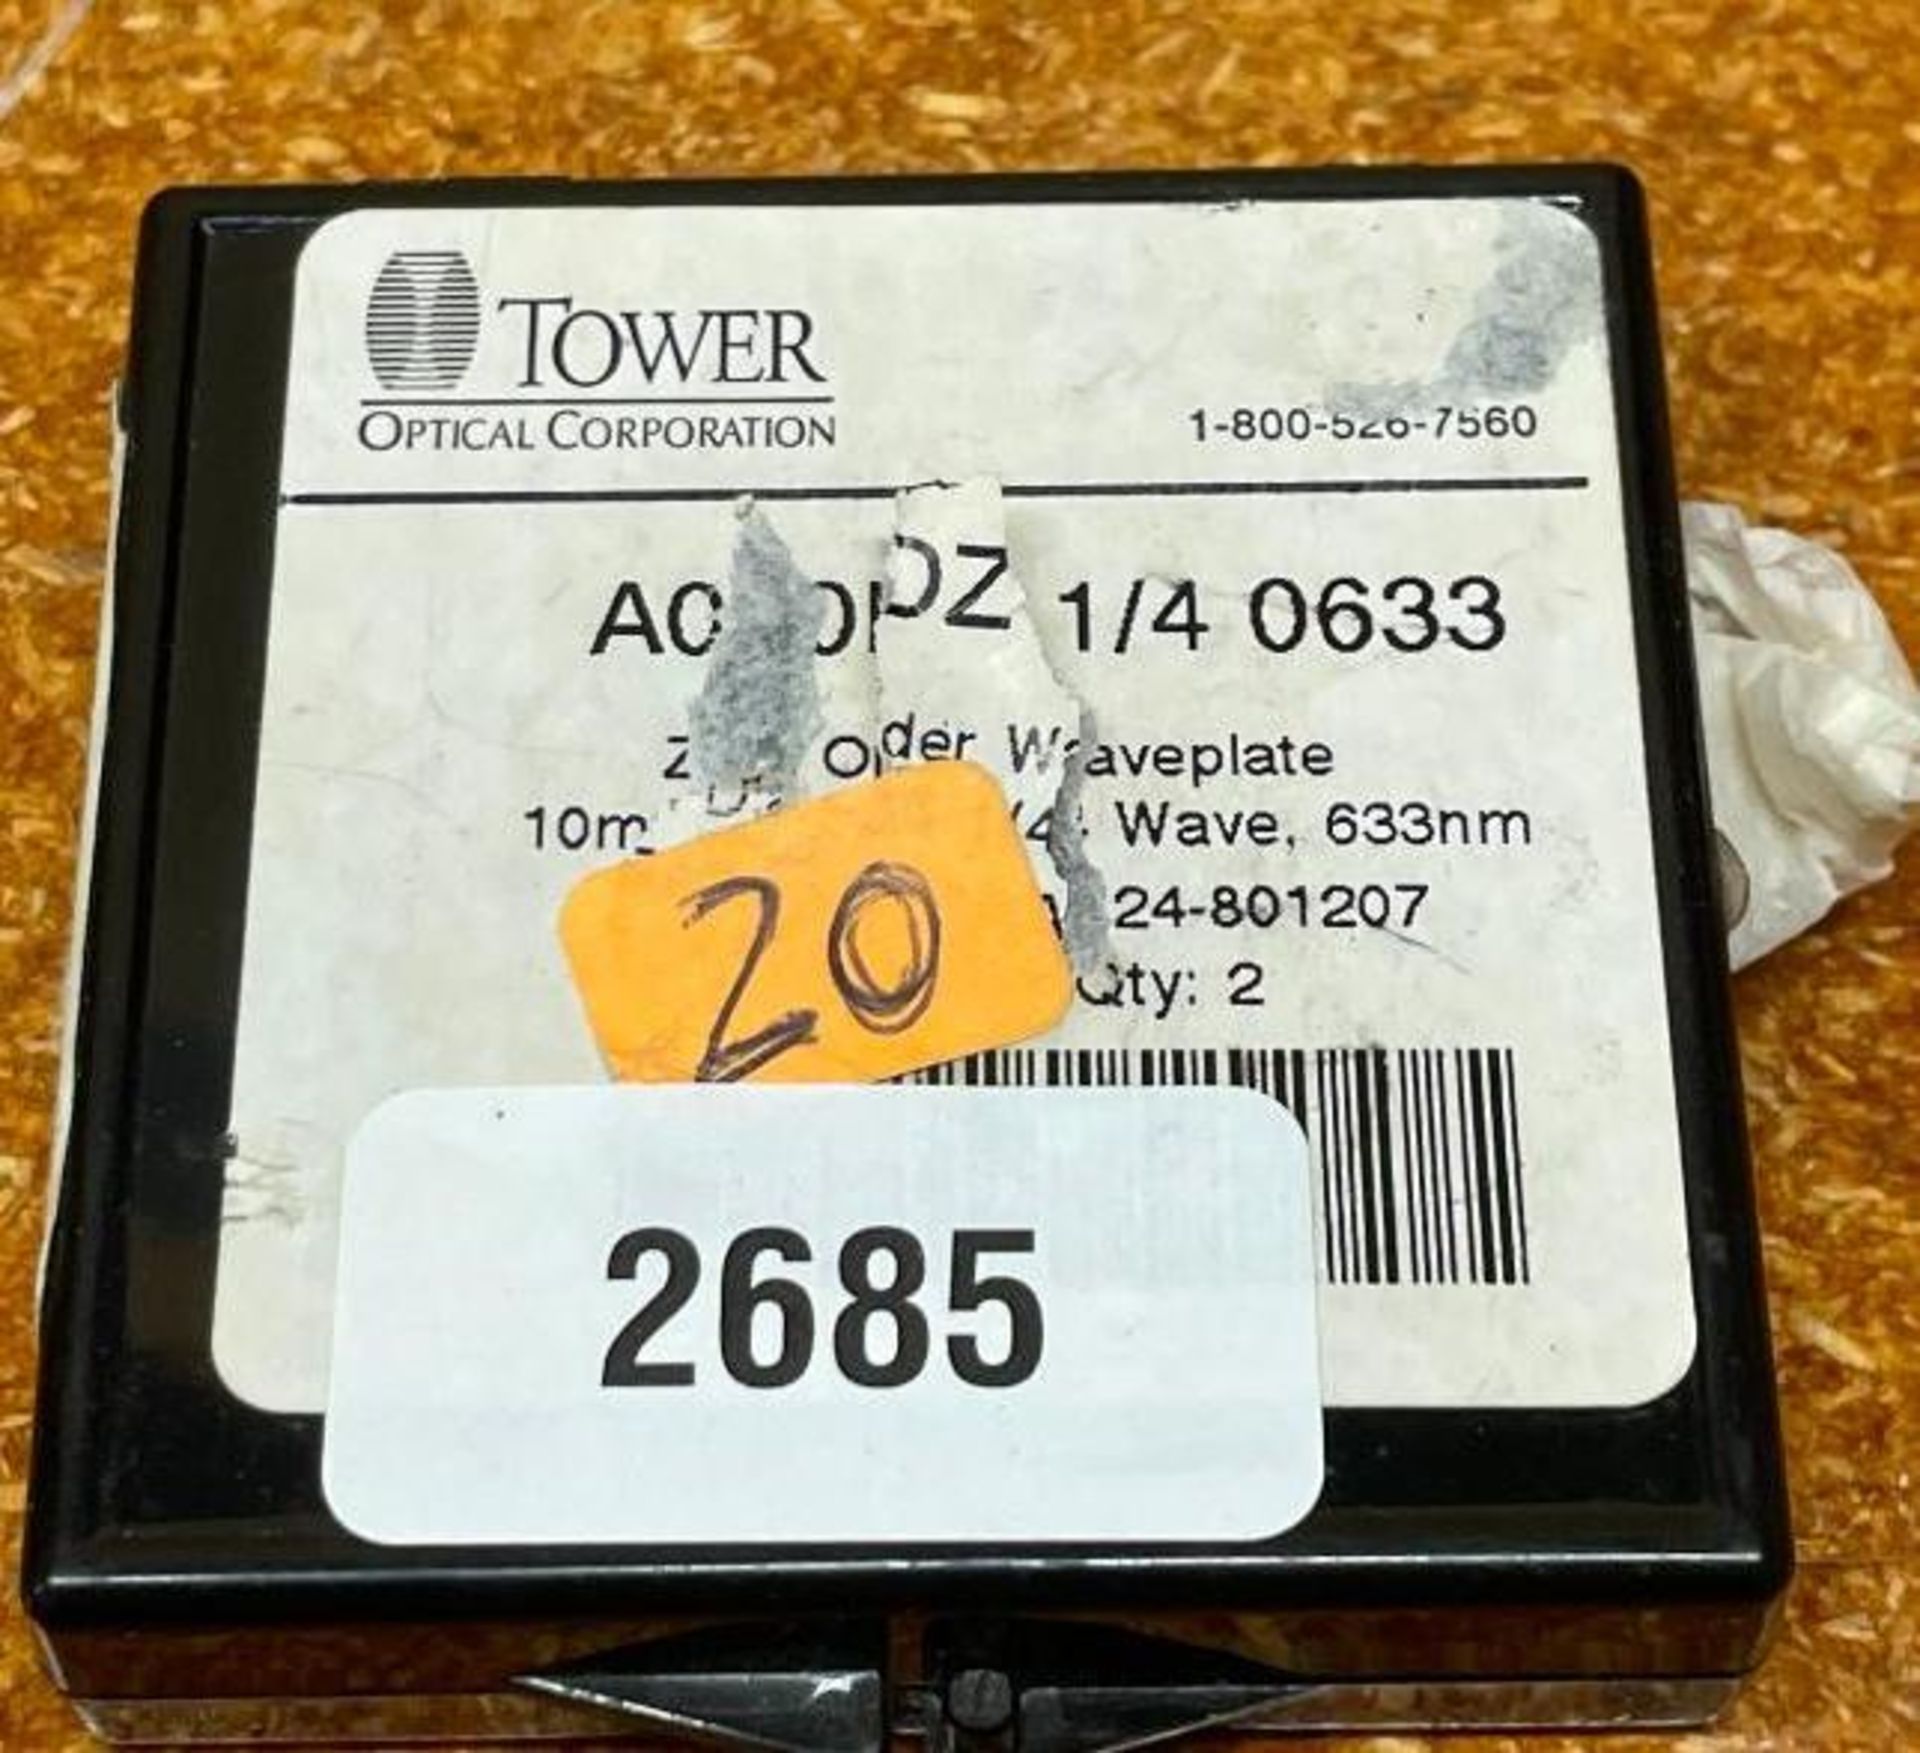 1/4 WAVEPLATE BRAND/MODEL: TOWER OPTICAL INFORMATION: 633 nm, DIAMETER 10mm QTY: 1 - Image 2 of 2